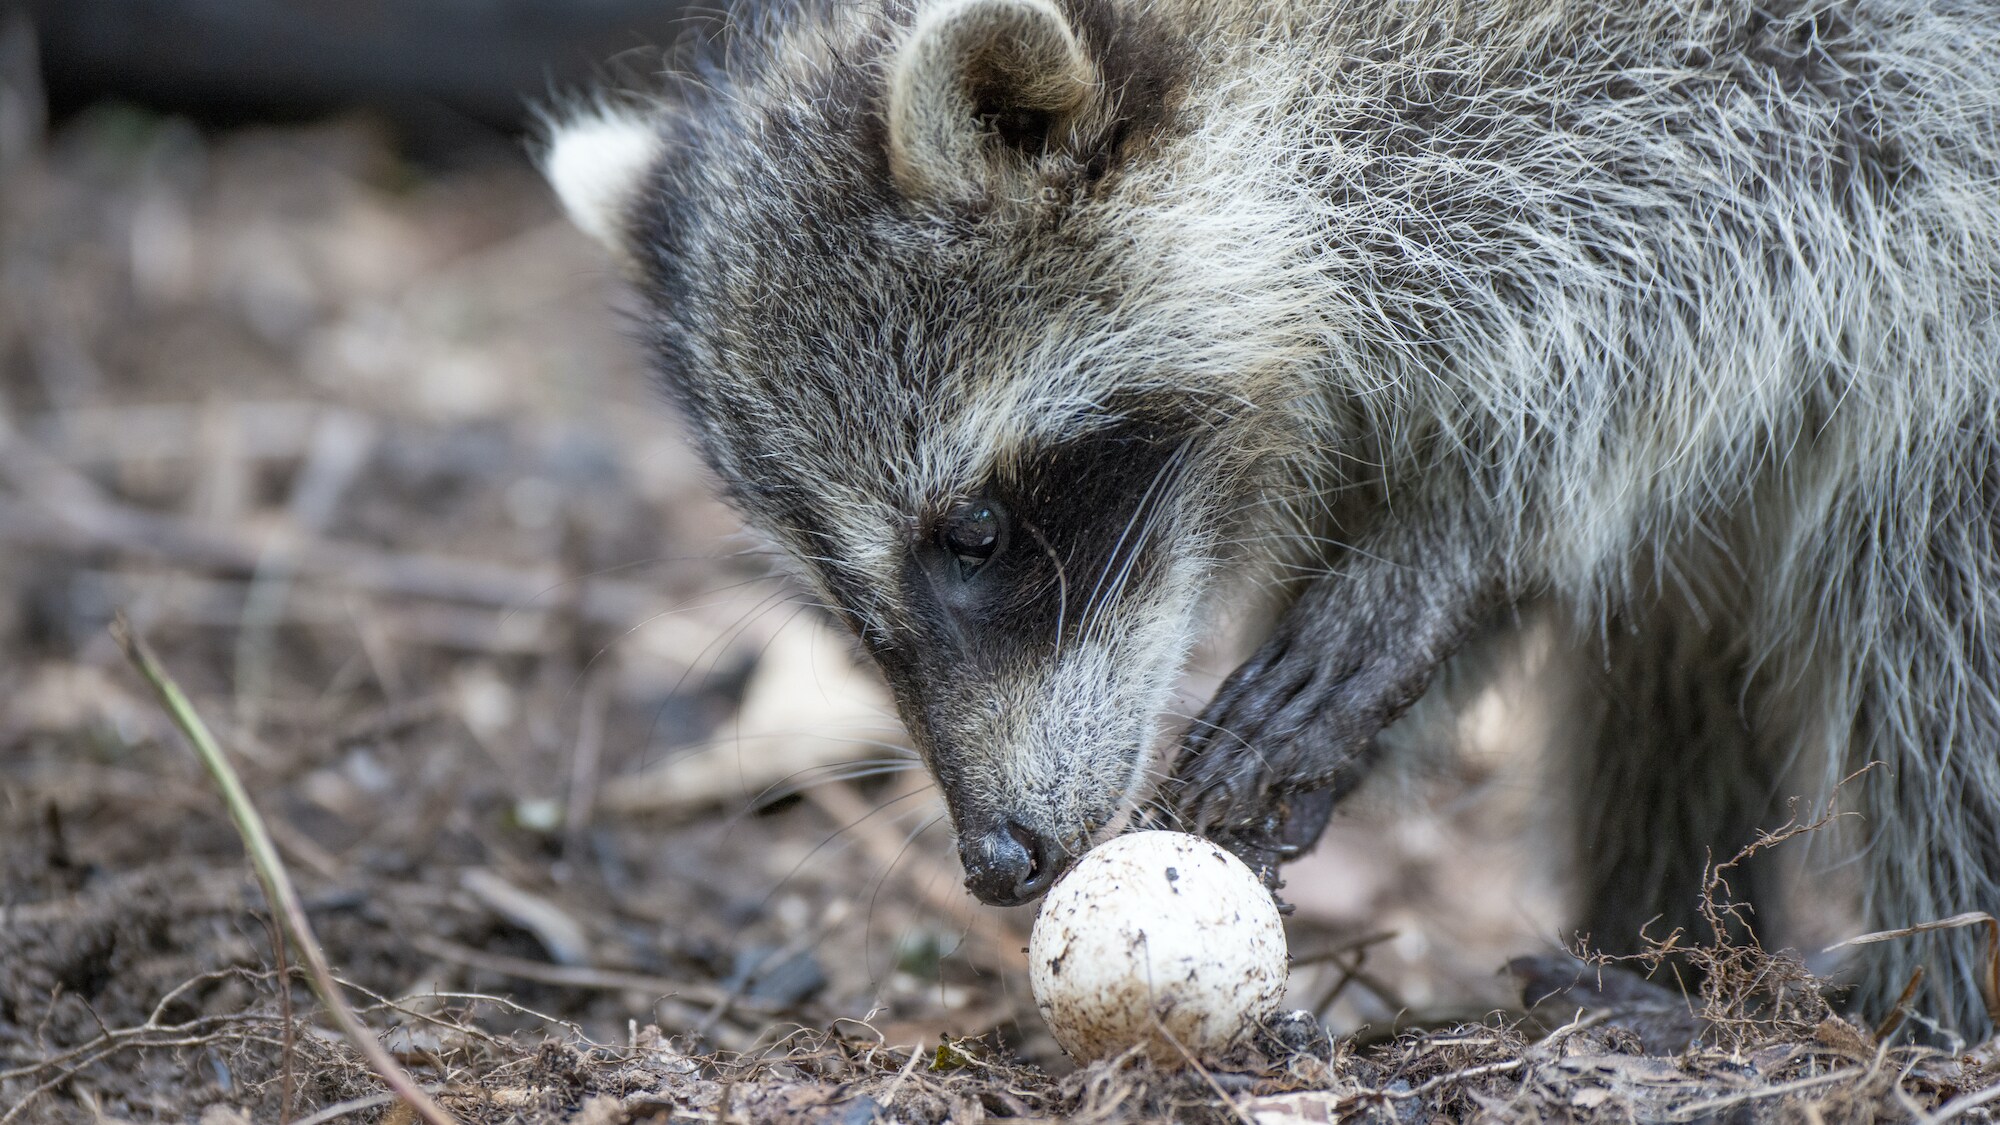 A raccoon raids an alligator nest. (National Geographic for Disney+/Maddie Close)